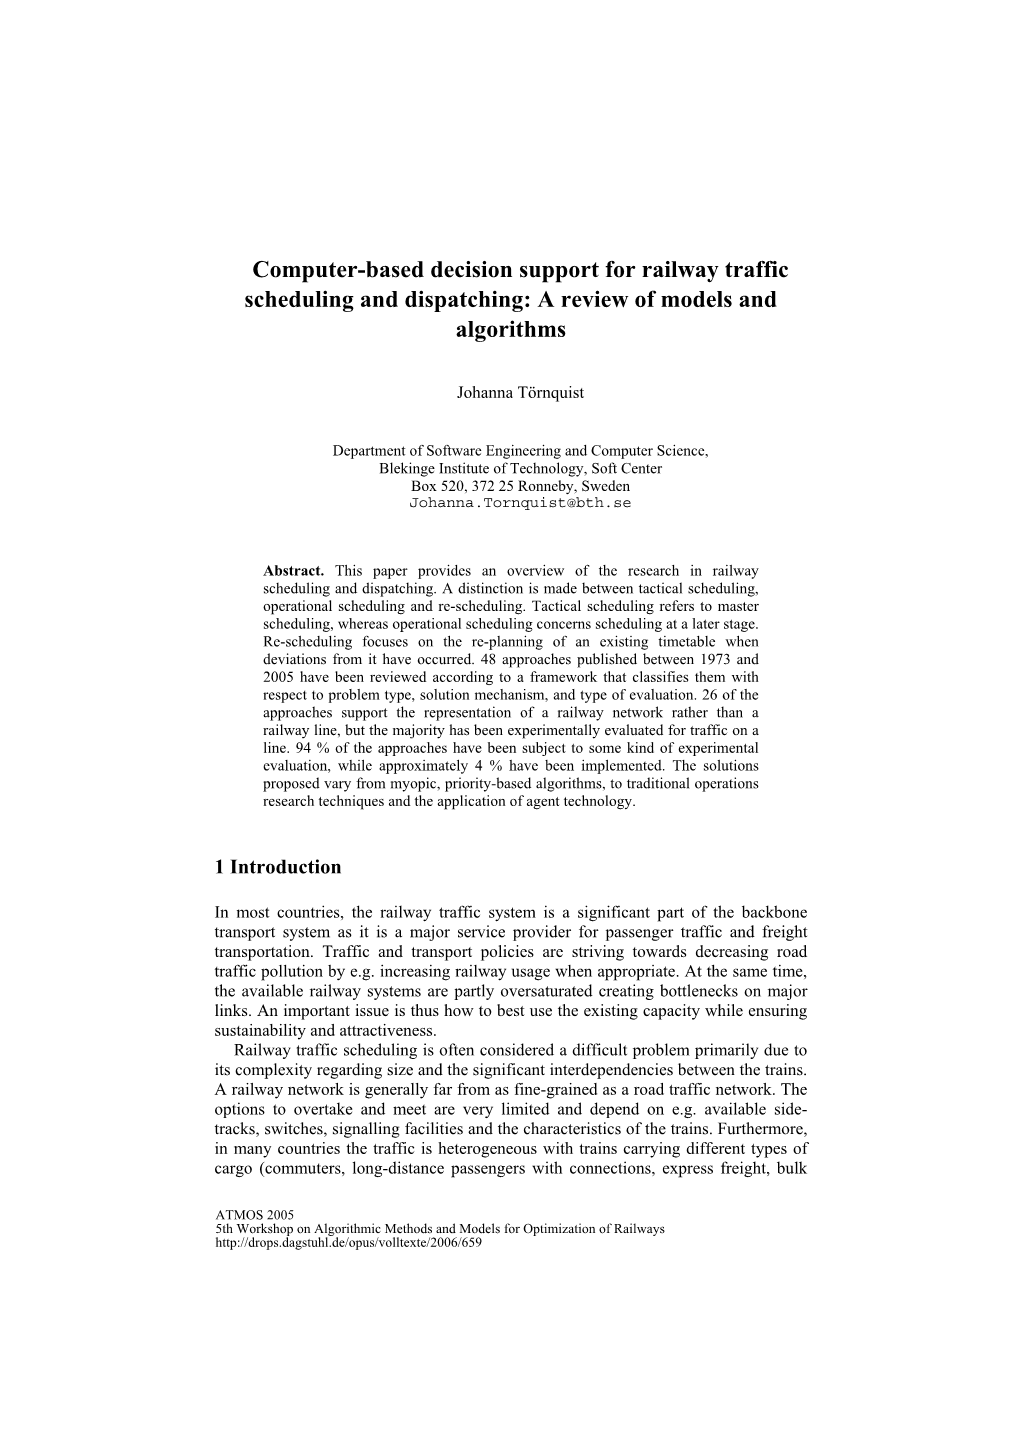 Computer-Based Decision Support for Railway Traffic Scheduling and Dispatching: a Review of Models and Algorithms